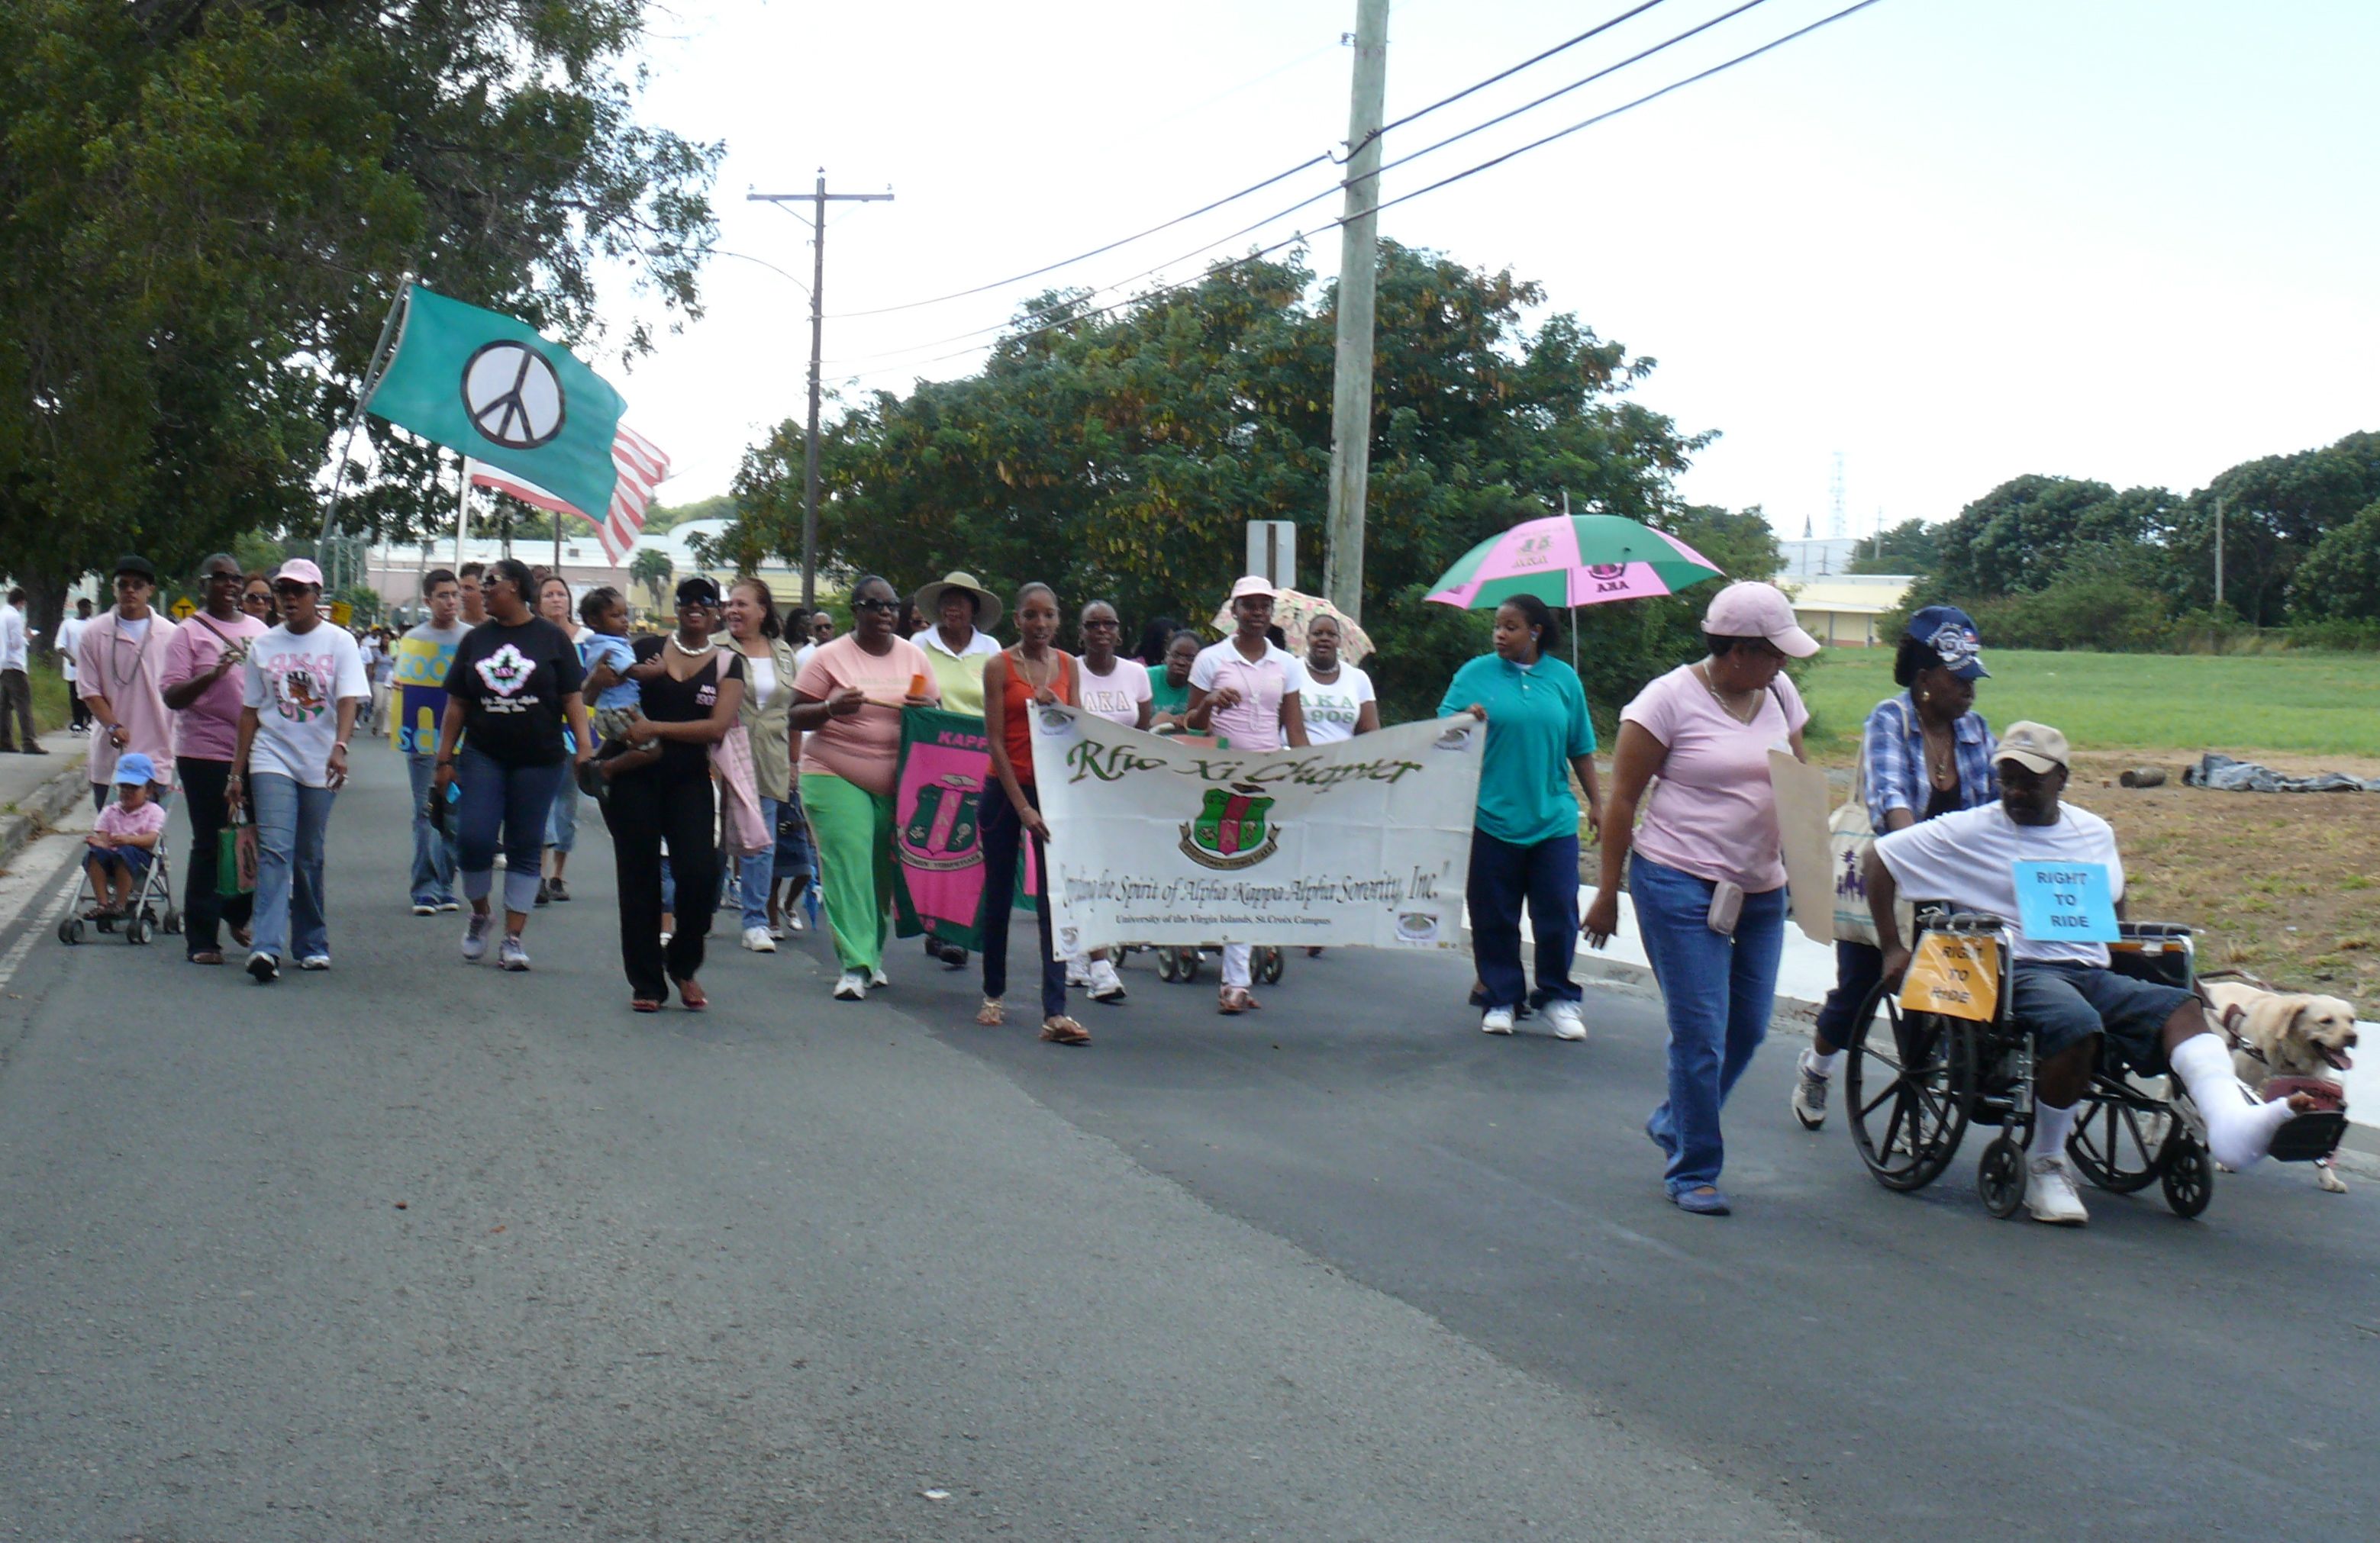 Marchers on St. Croix pay tribute to the legacy of Rev. Martin Luther King Jr.